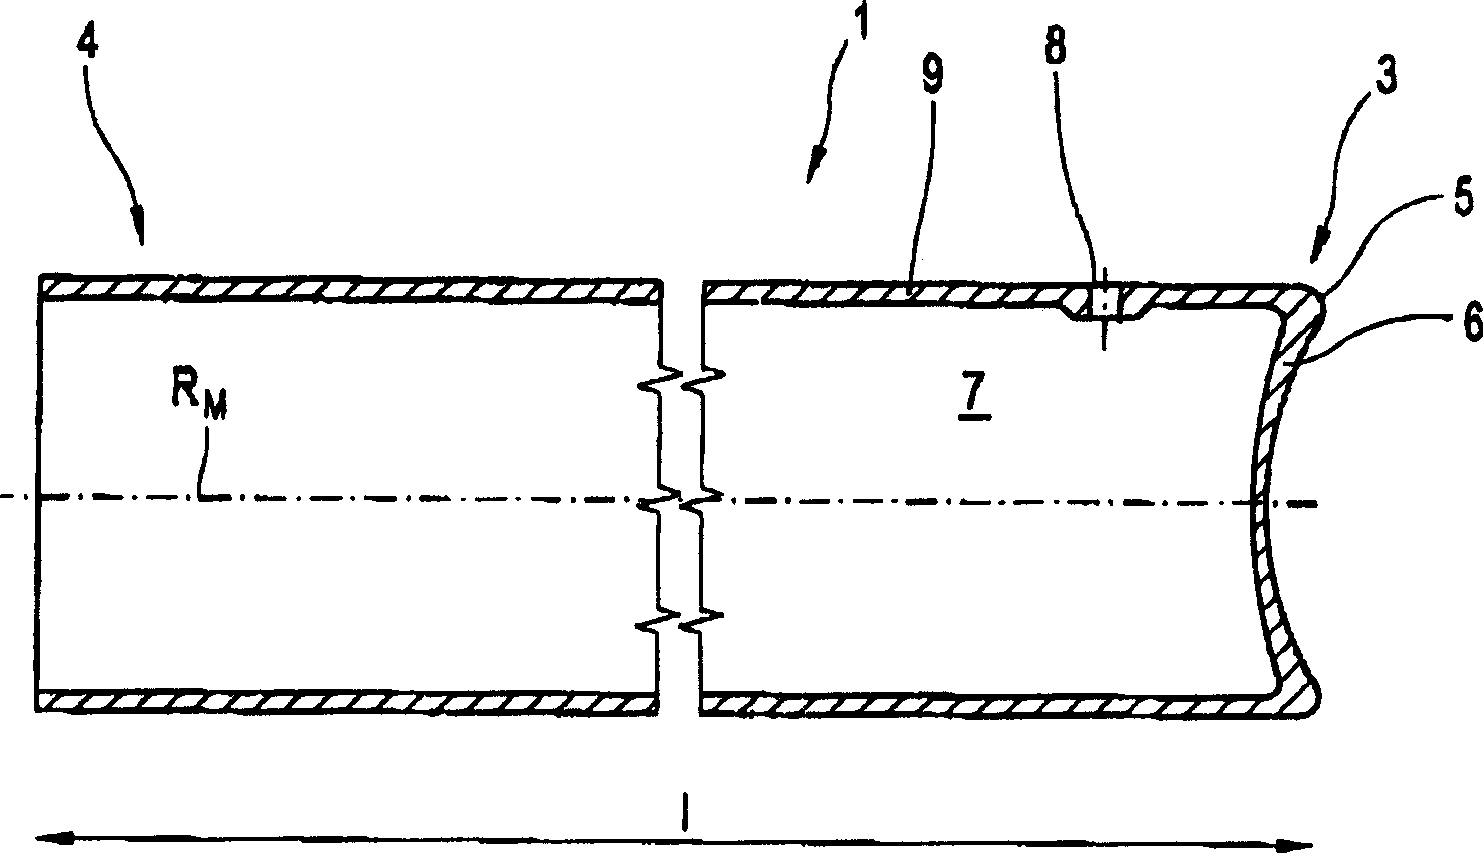 Tube preform and method for producing glass containers from a tube preform